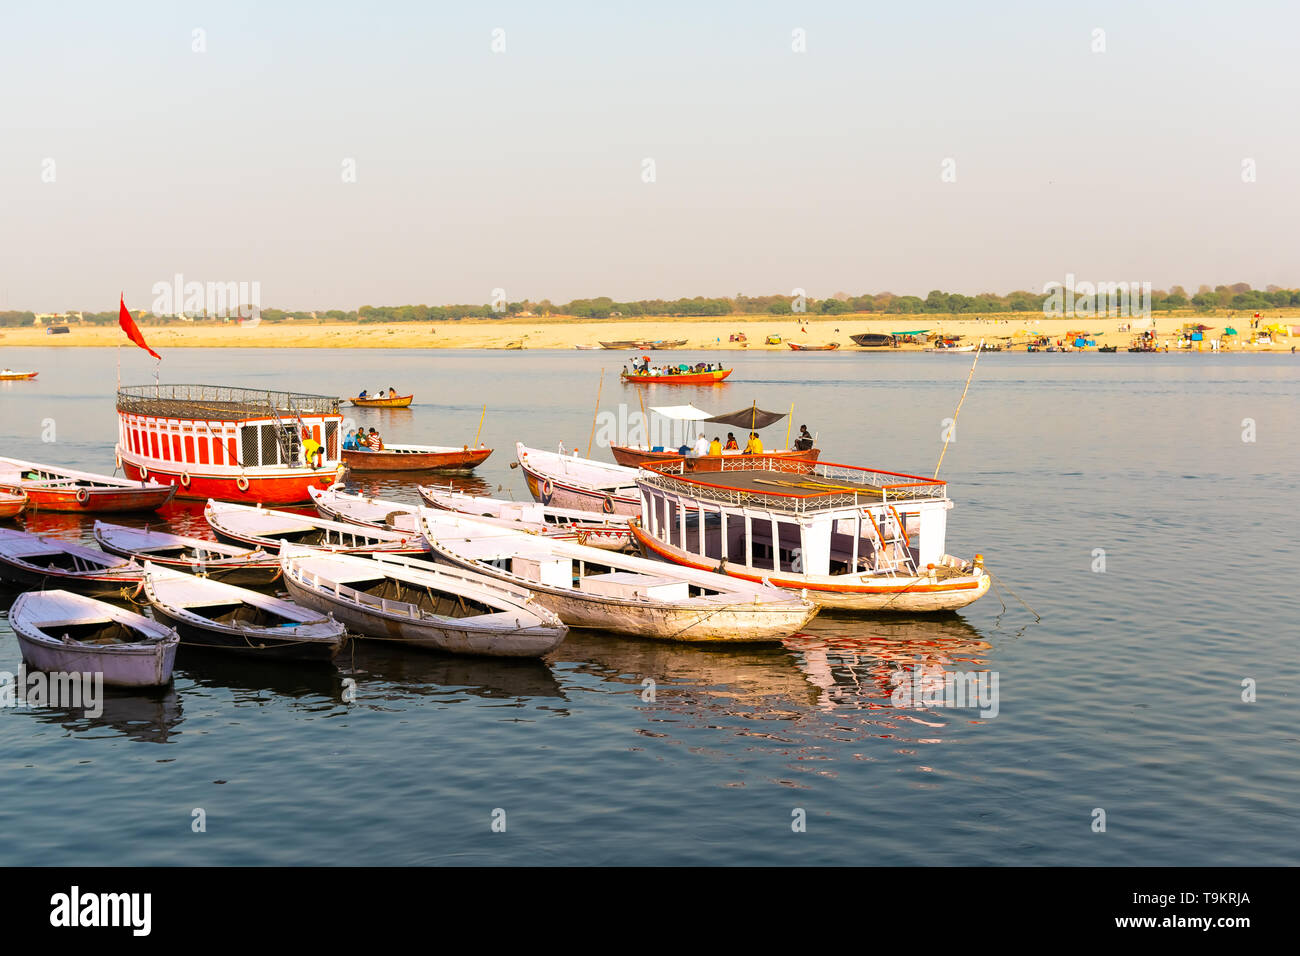 Colorful boats on Ganges river in Varanasi, India Stock Photo